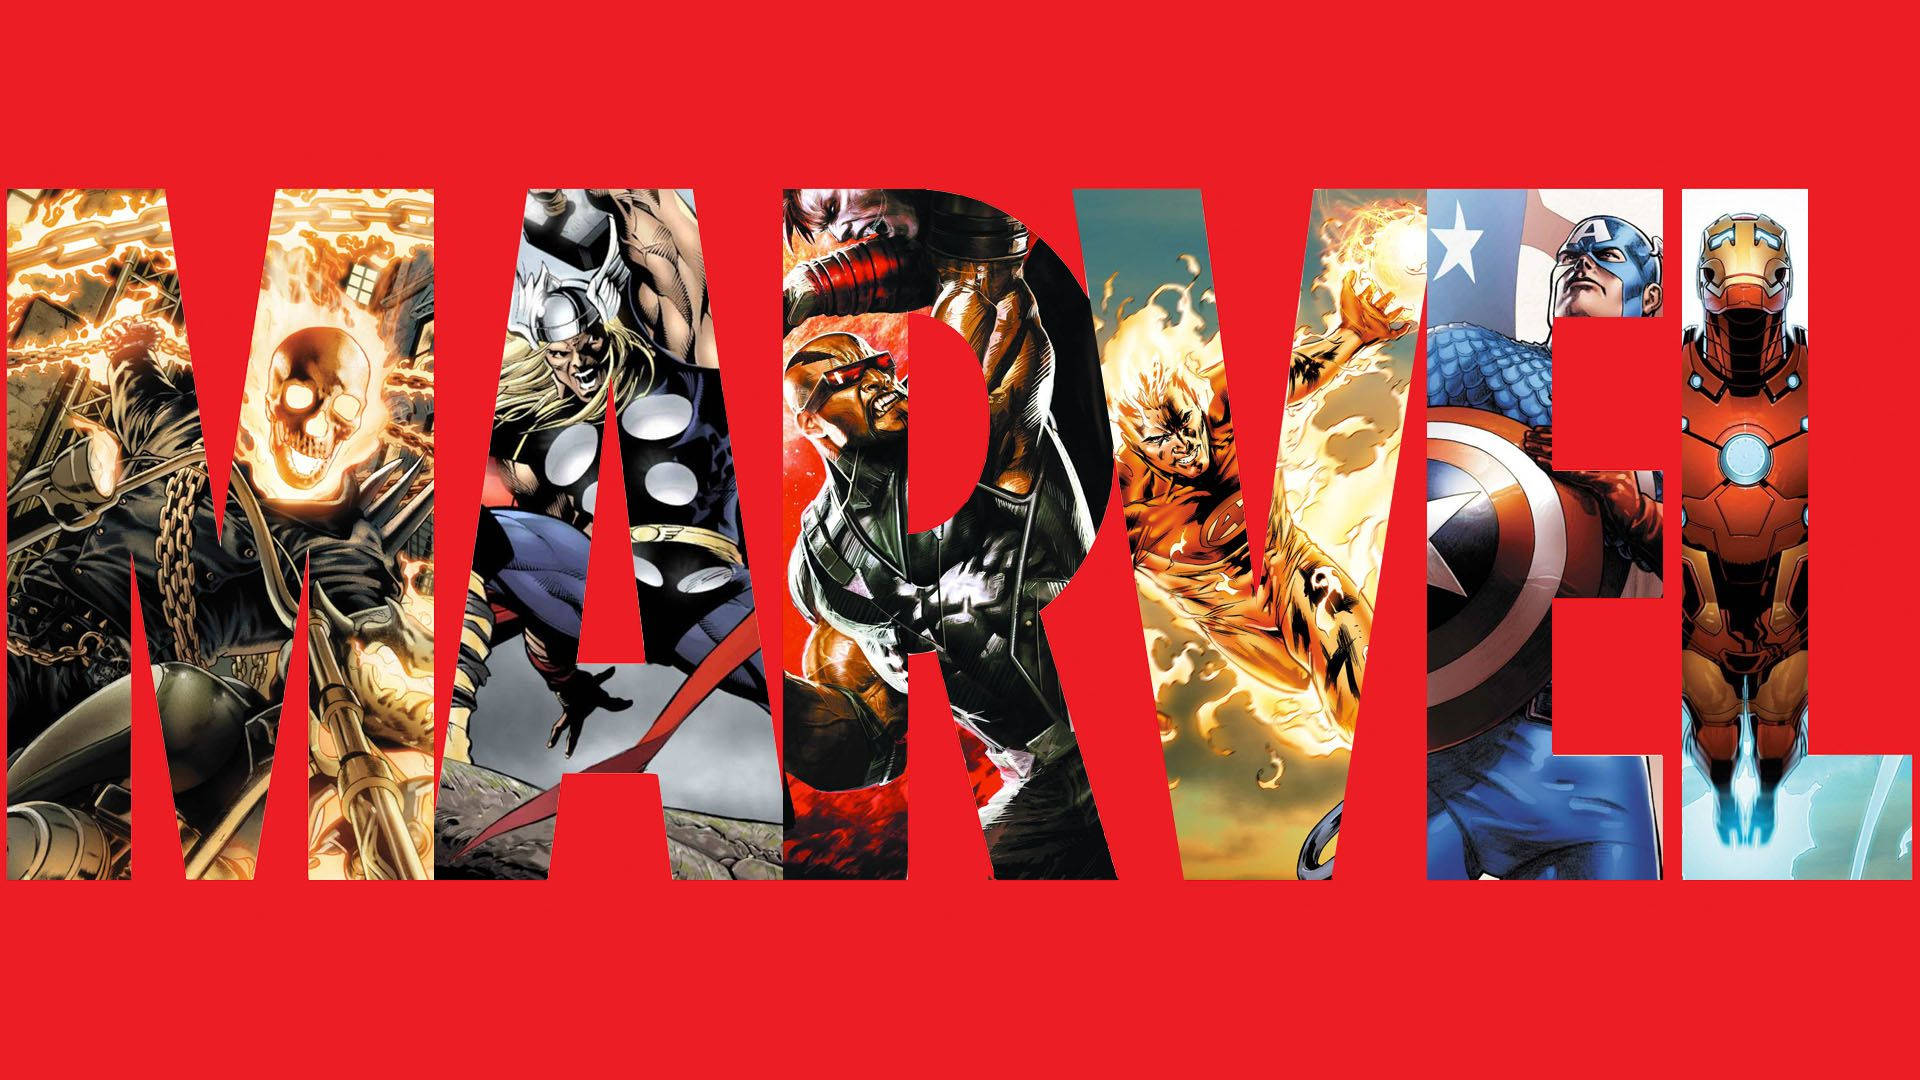 Marvel comics with superheroes reflection in big letters.